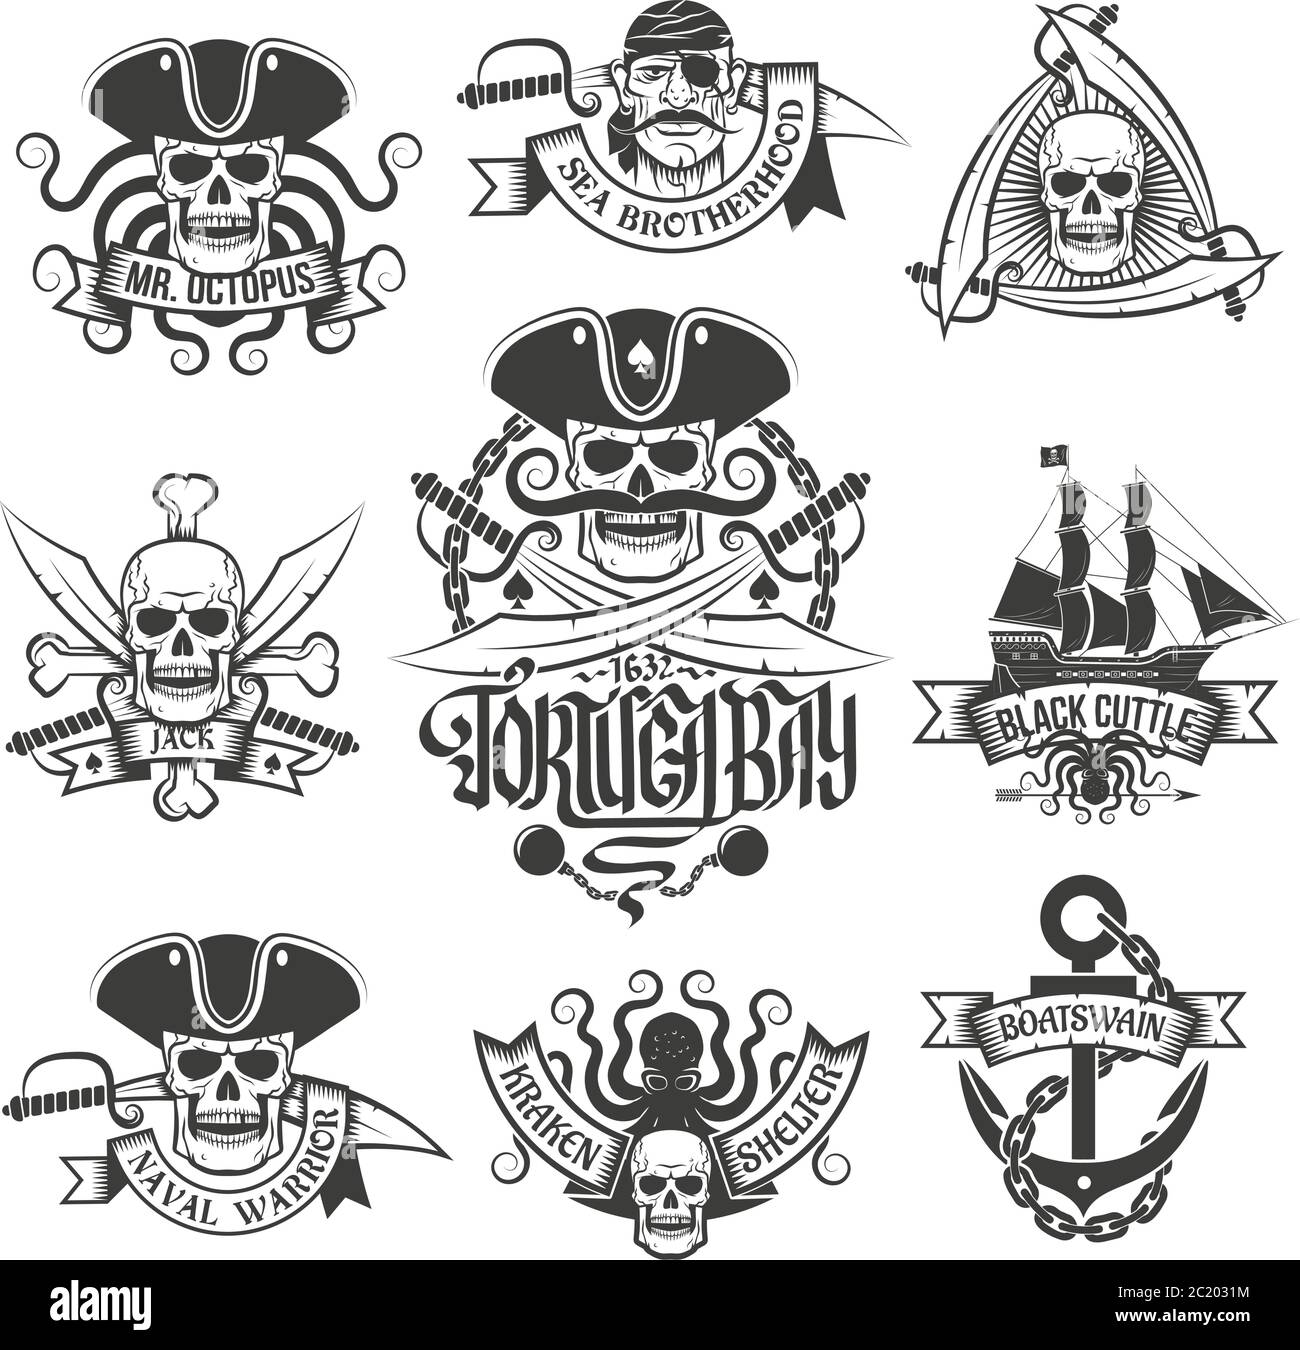 Pirate items Stock Vector